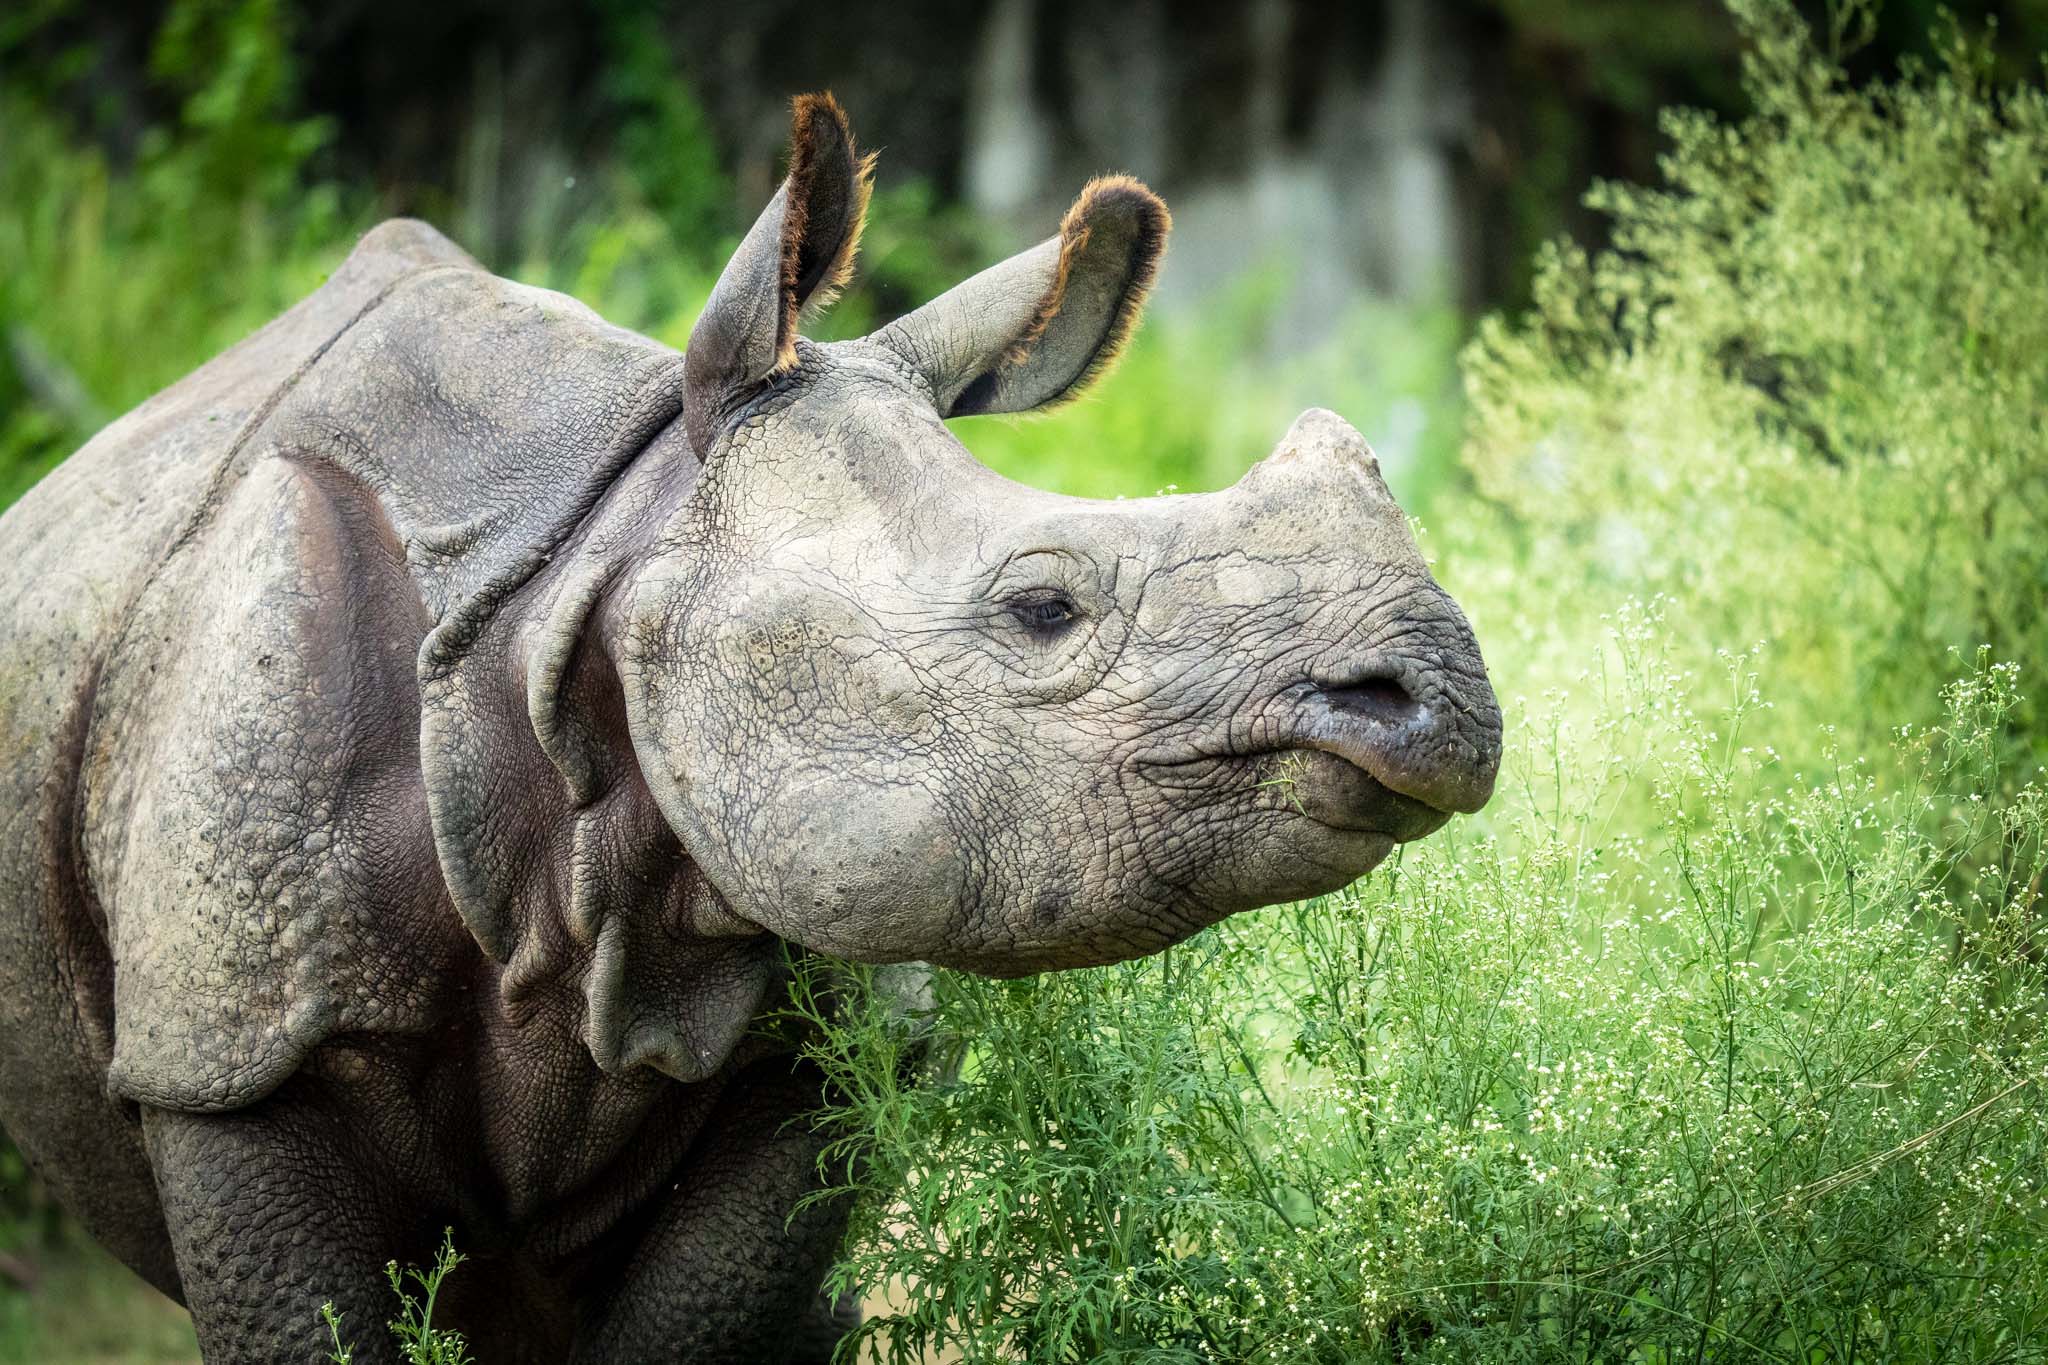 A portrait in profile of a rhino looking stoic amid tall green plants